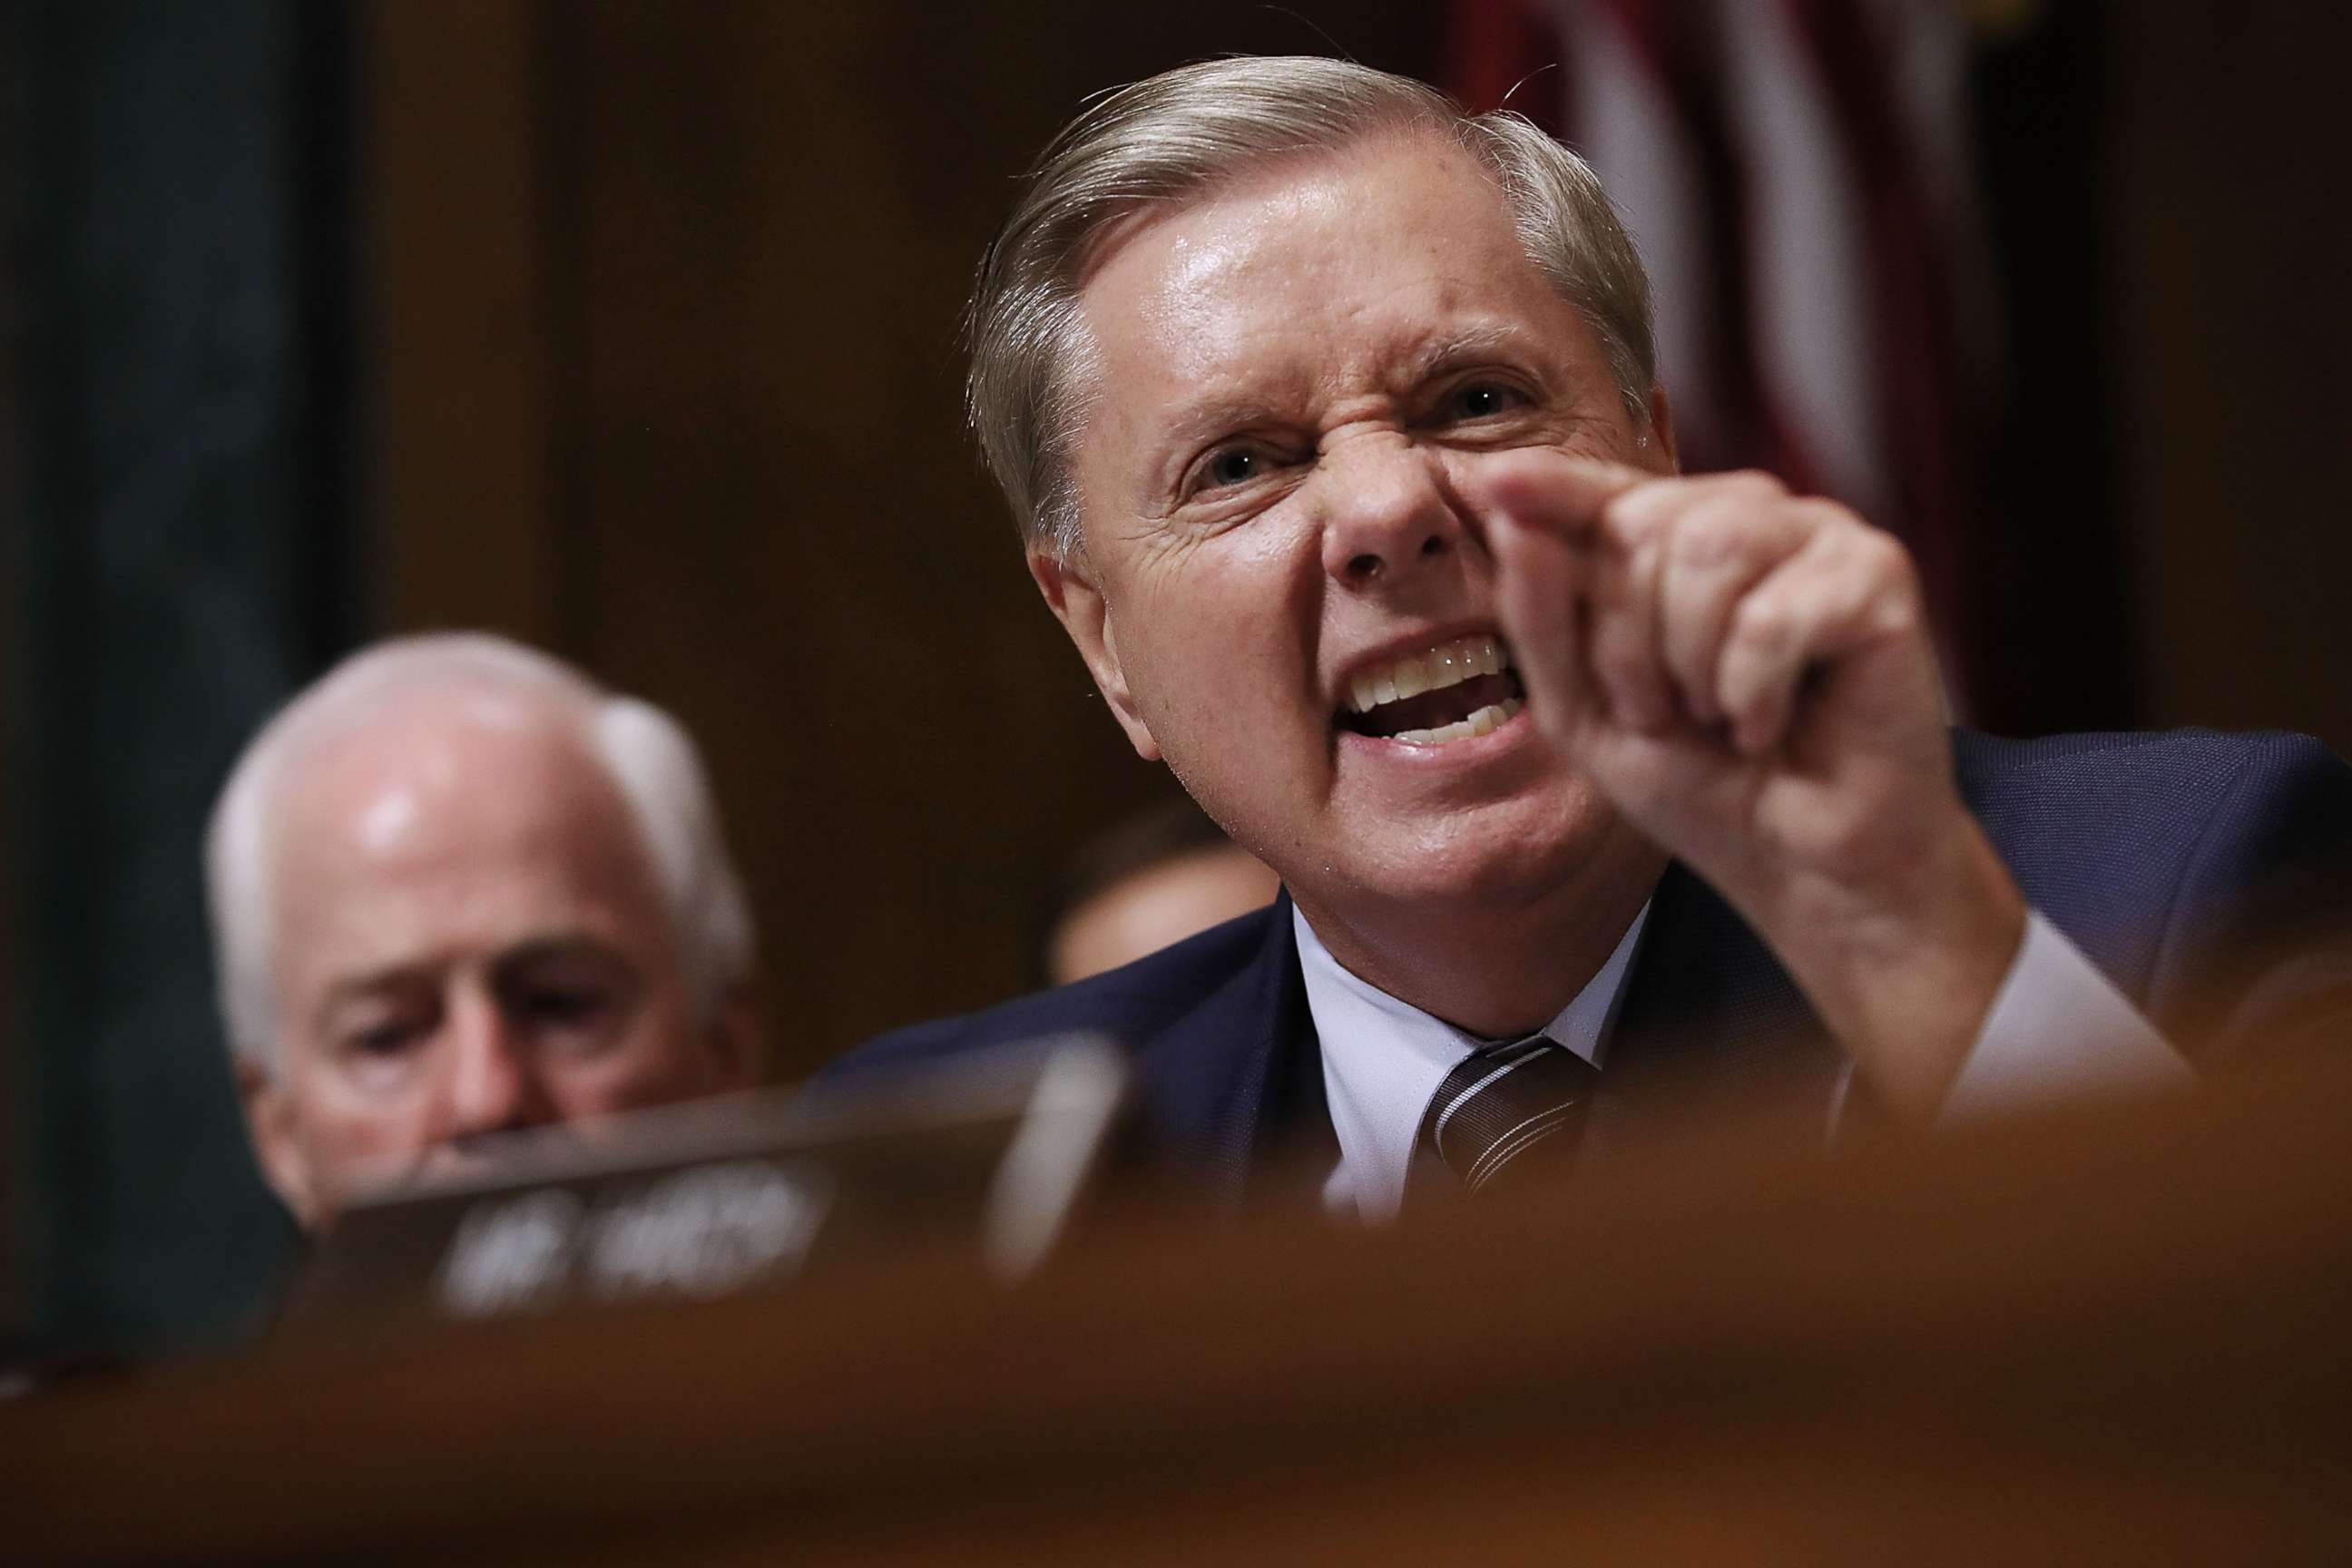 PHOTO: Senate Judiciary Committee member Sen. Lindsey Graham shouts while questioning Judge Brett Kavanaugh during his Supreme Court confirmation hearing on Capitol Hill, Sept. 27, 2018 in Washington.